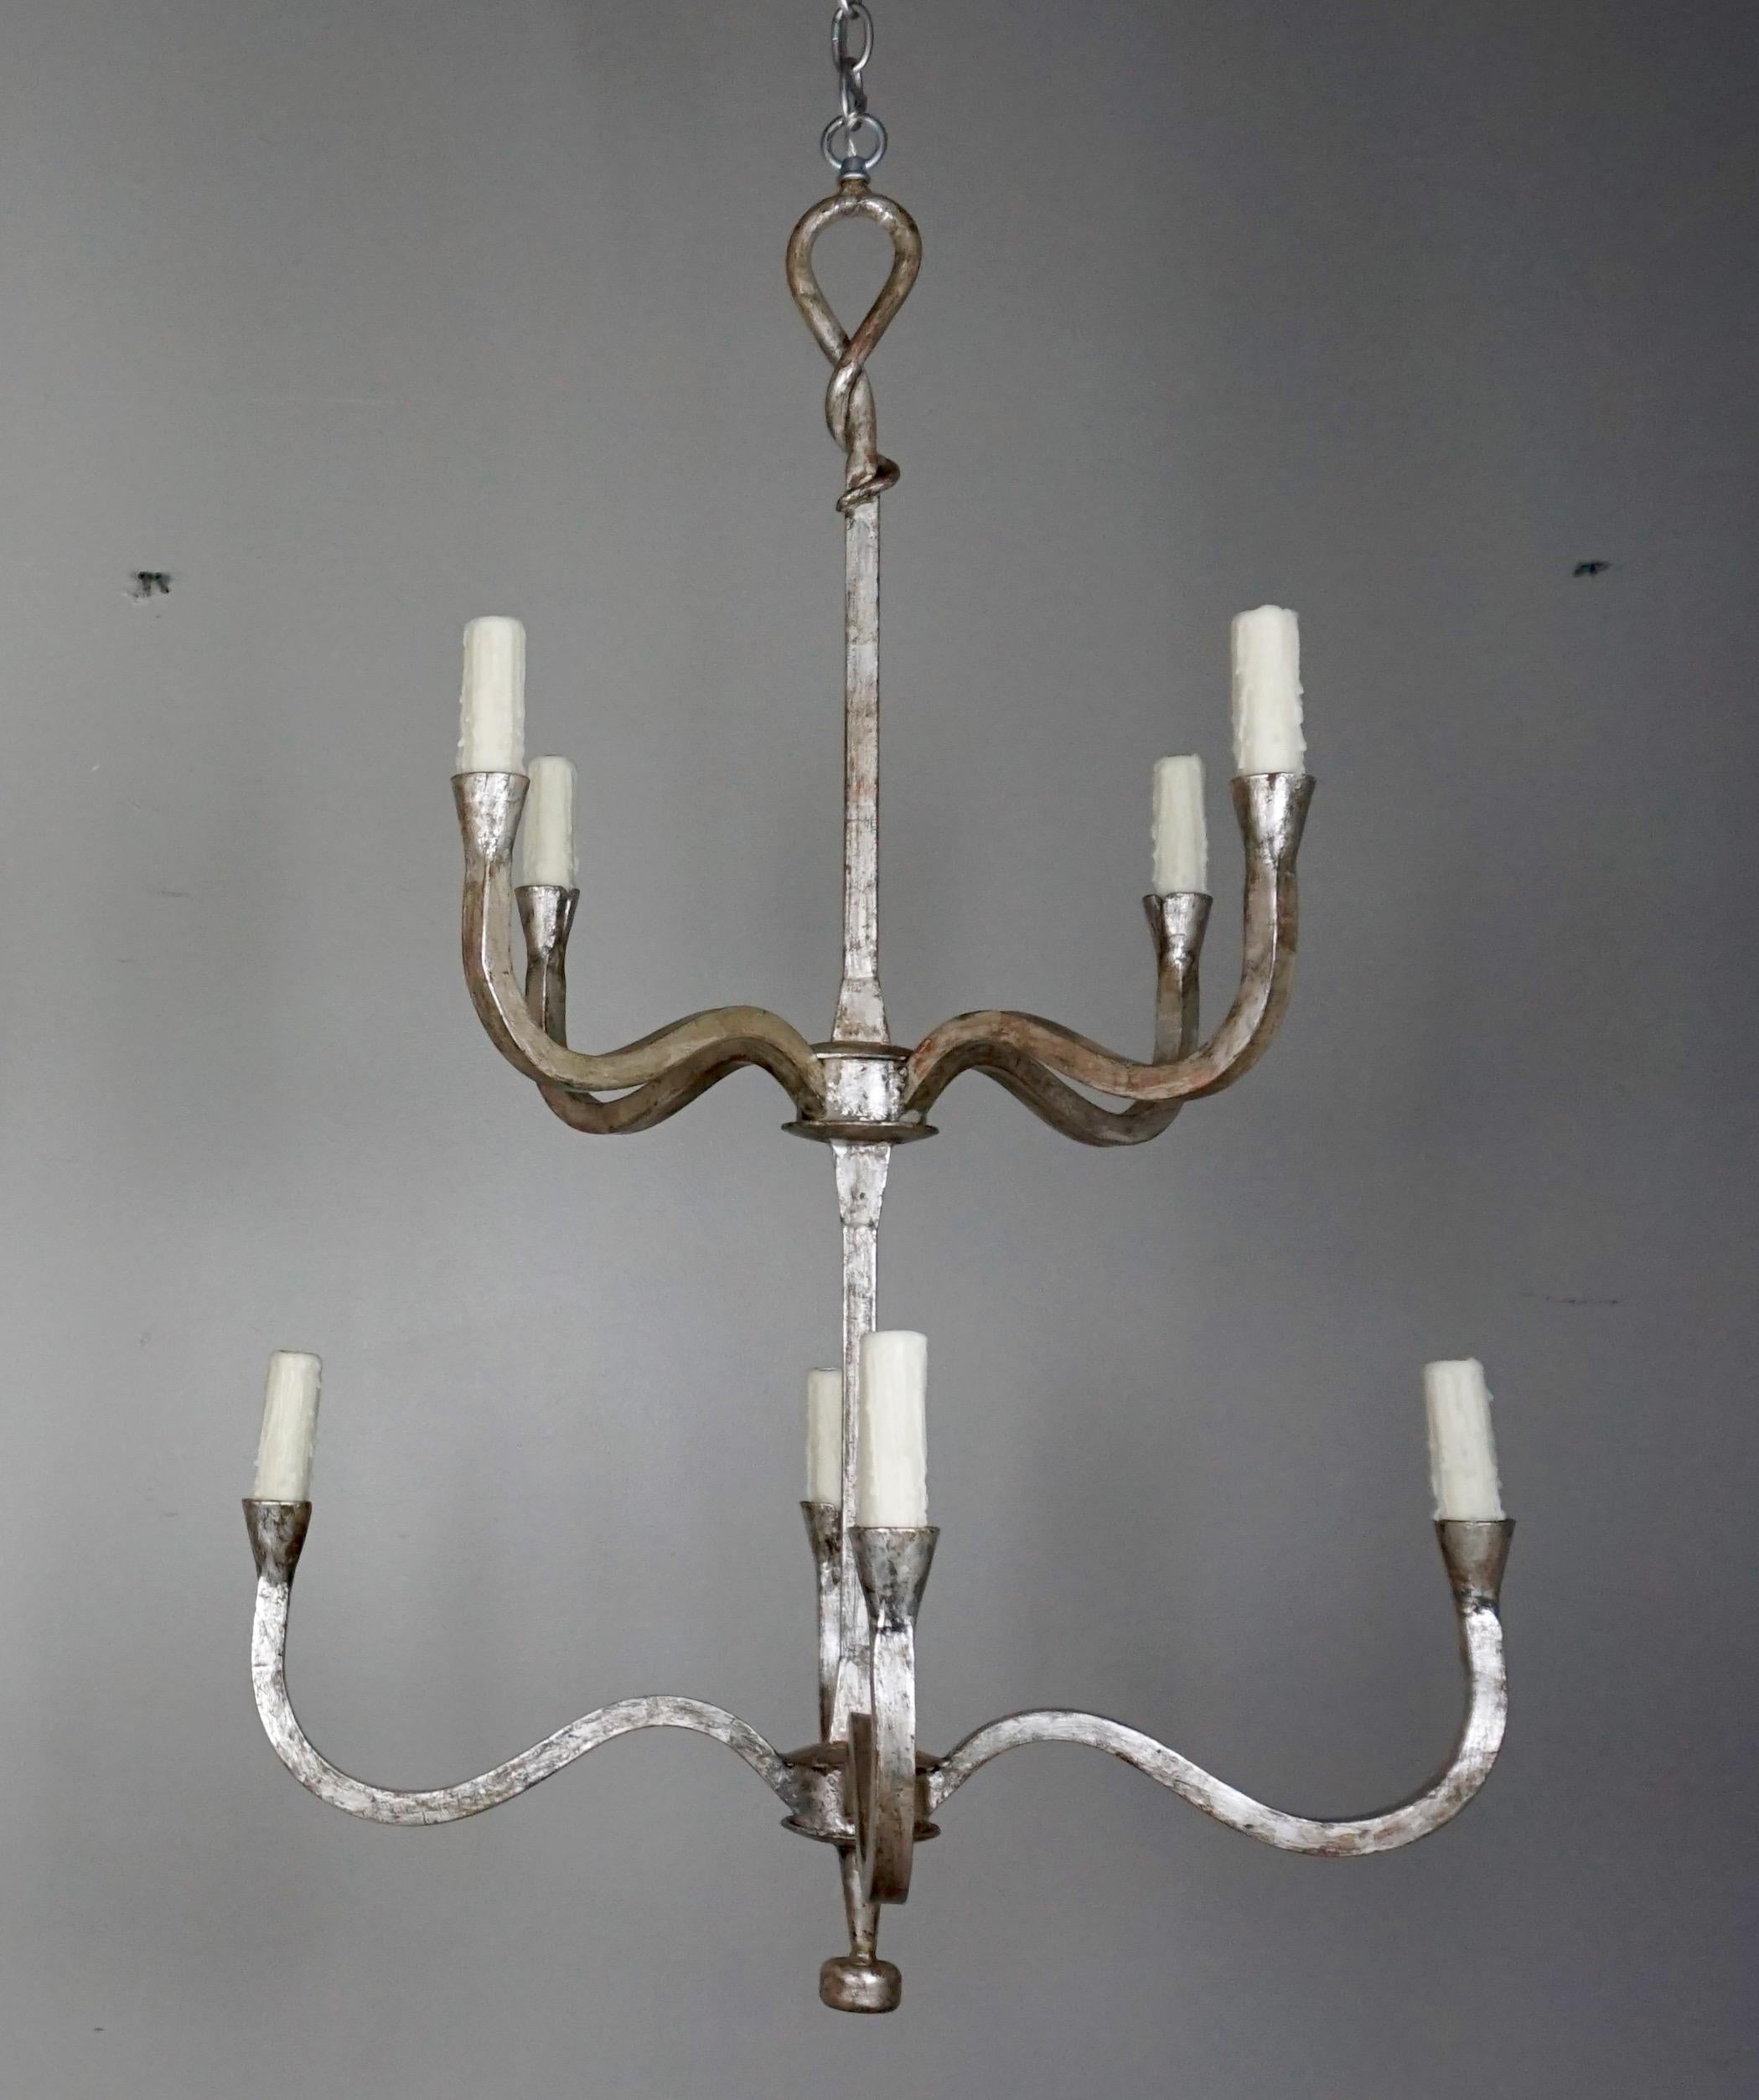 Silver gilt wrought iron two-tier chandelier by Melissa Levinson.   Each chandelier has eight candleholders with drip wax candle covers. The fixtures are wired and include chain and canopy. The fixture also comes in gold leaf or natural wrought iron